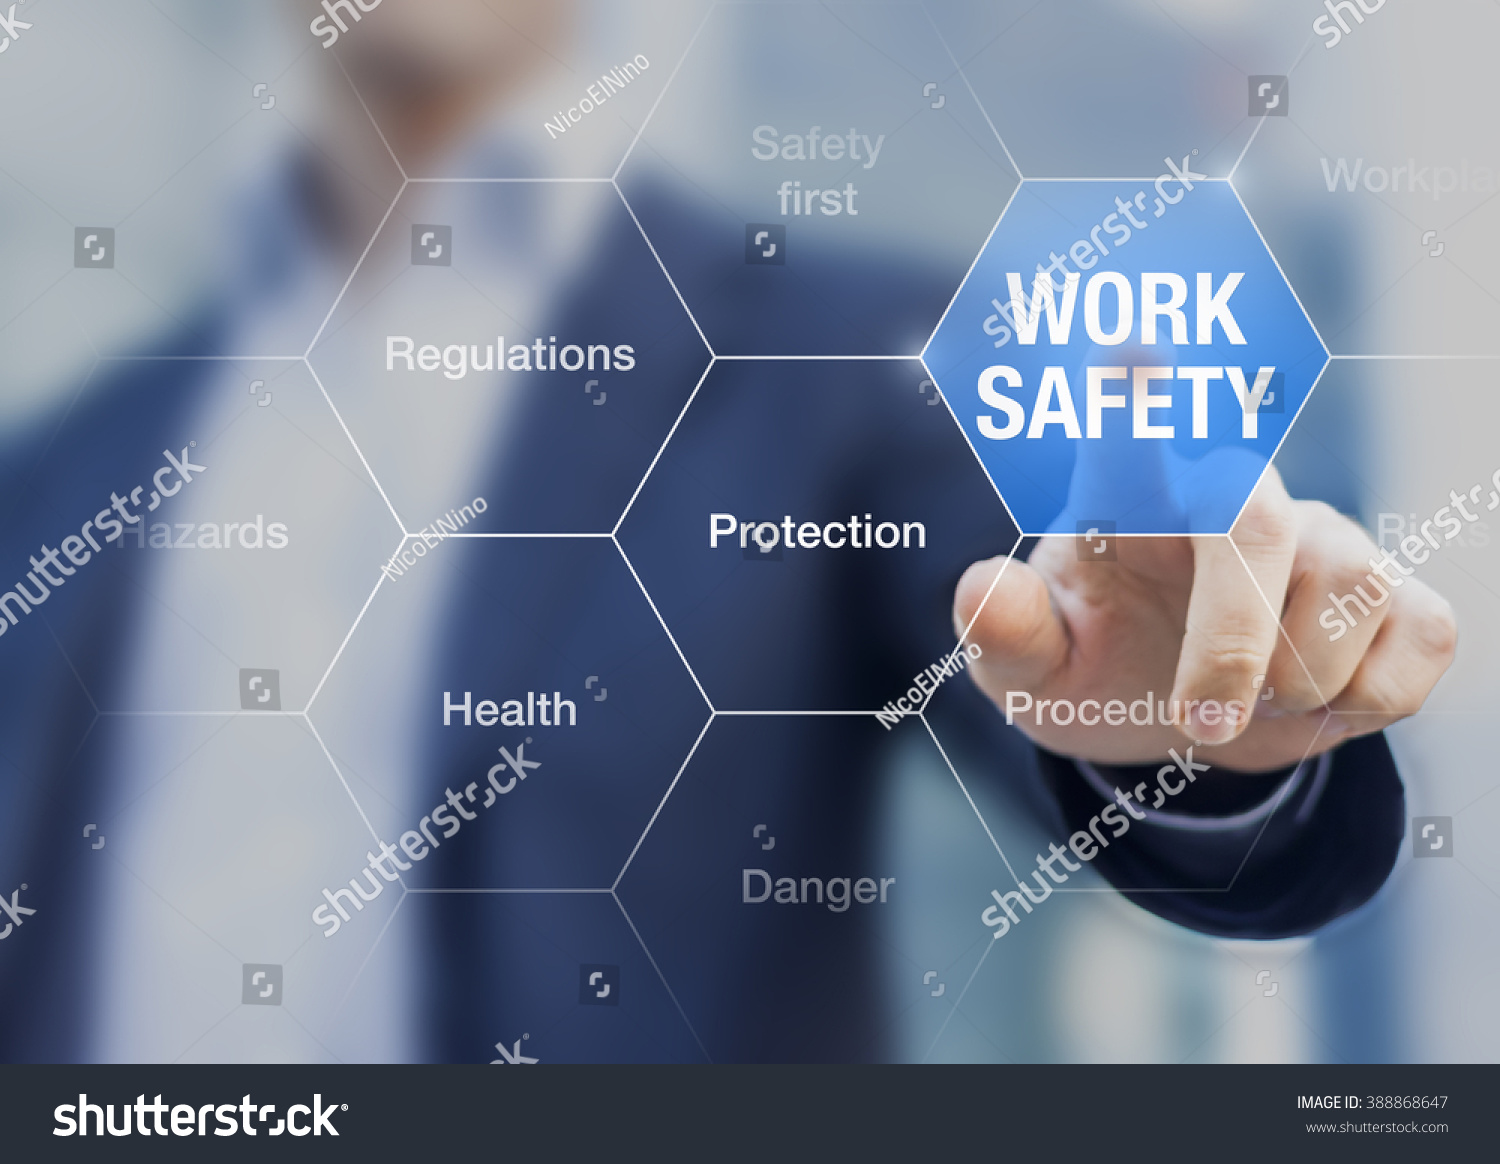 Businessman presenting work safety concept, hazards, protections, health and regulations #388868647